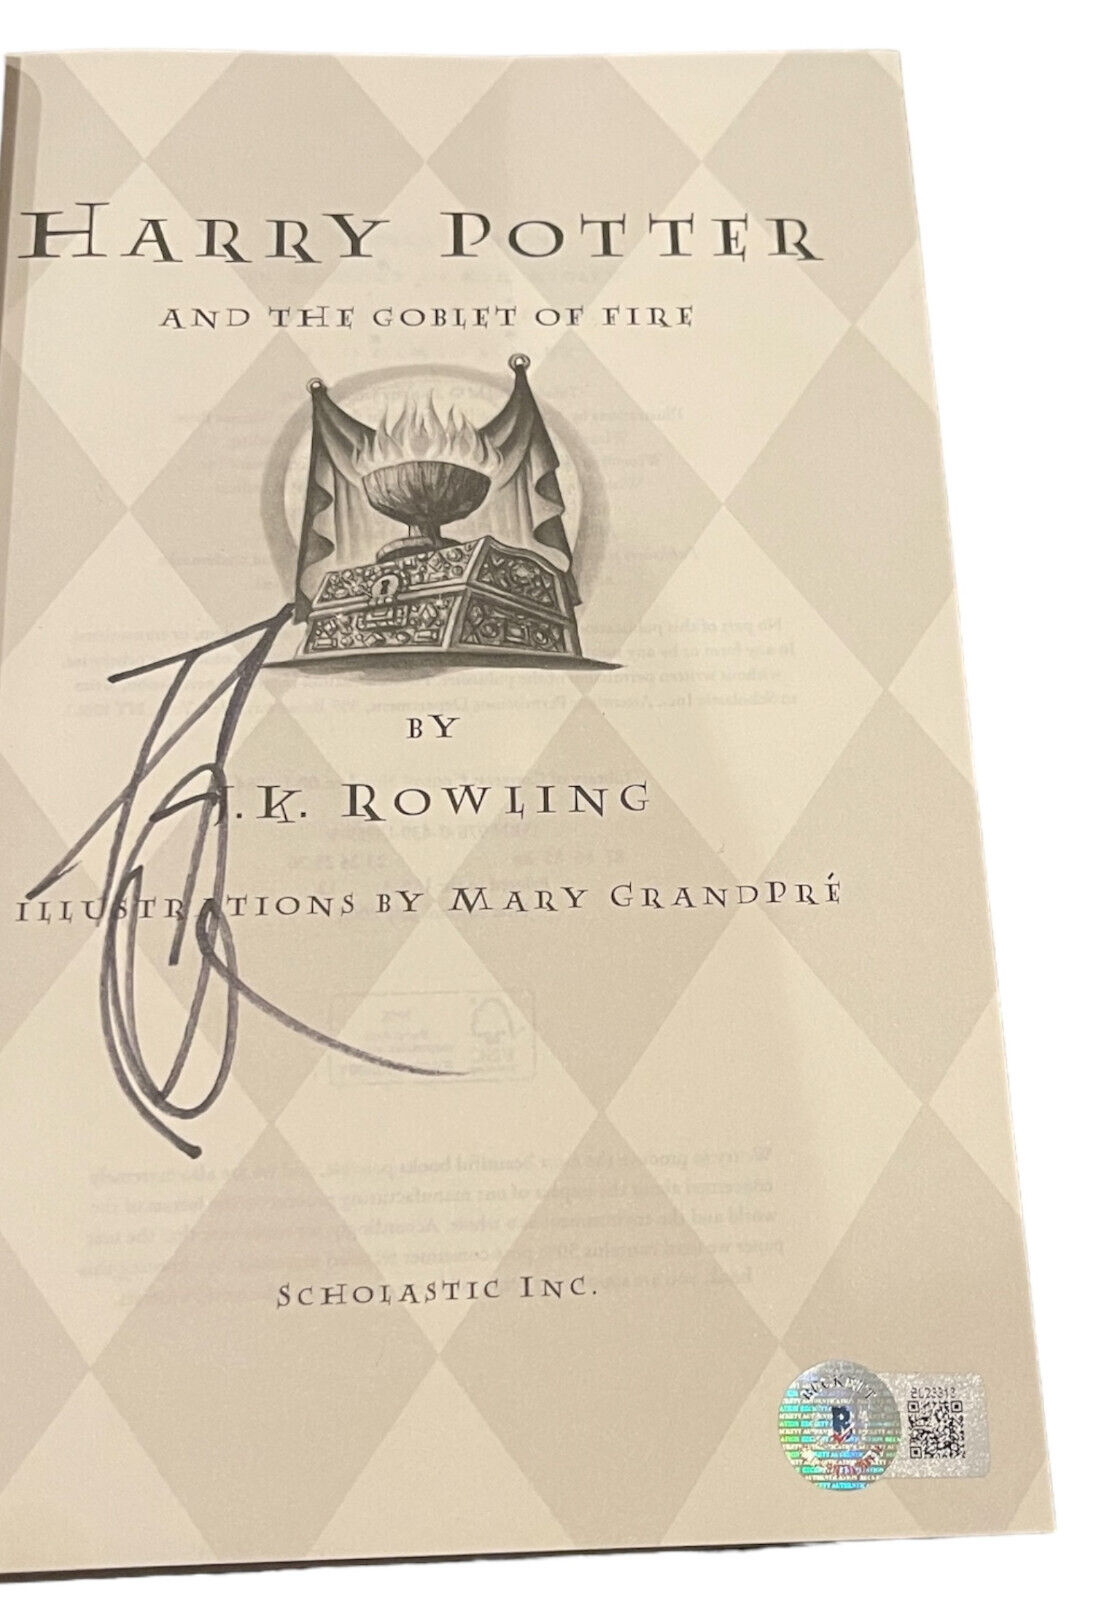 Daniel Radcliffe Signed Autograph Harry Potter And The Goblet Of Fire Book BAS